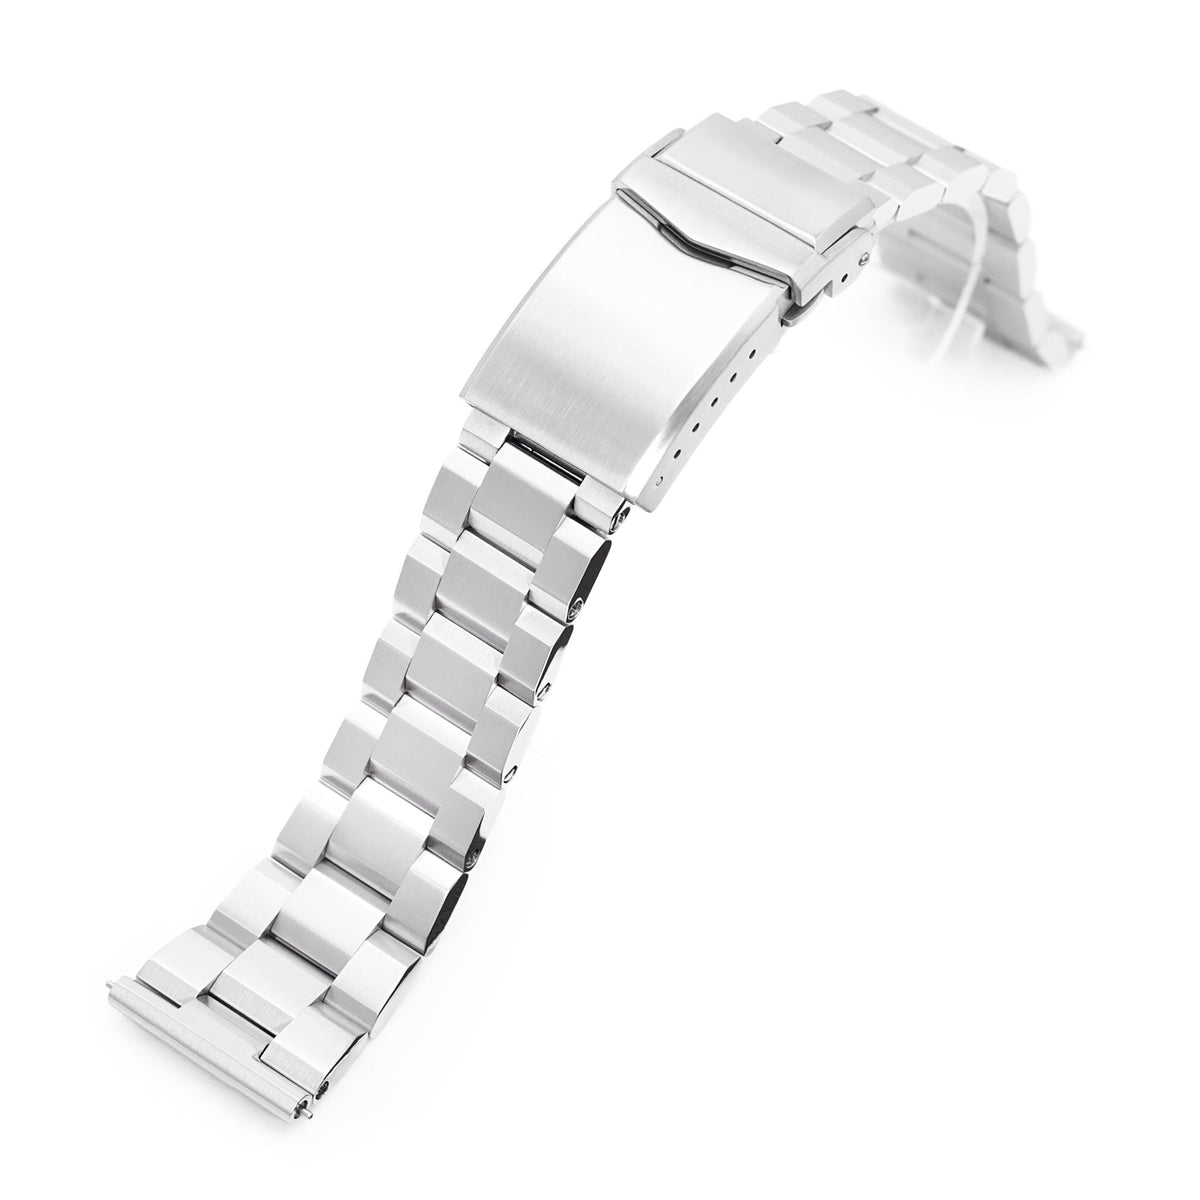 22mm Hexad III QR Watch Band Straight End Quick Release, 316L Stainless Steel Brushed V-Clasp Strapcode Watch Bands